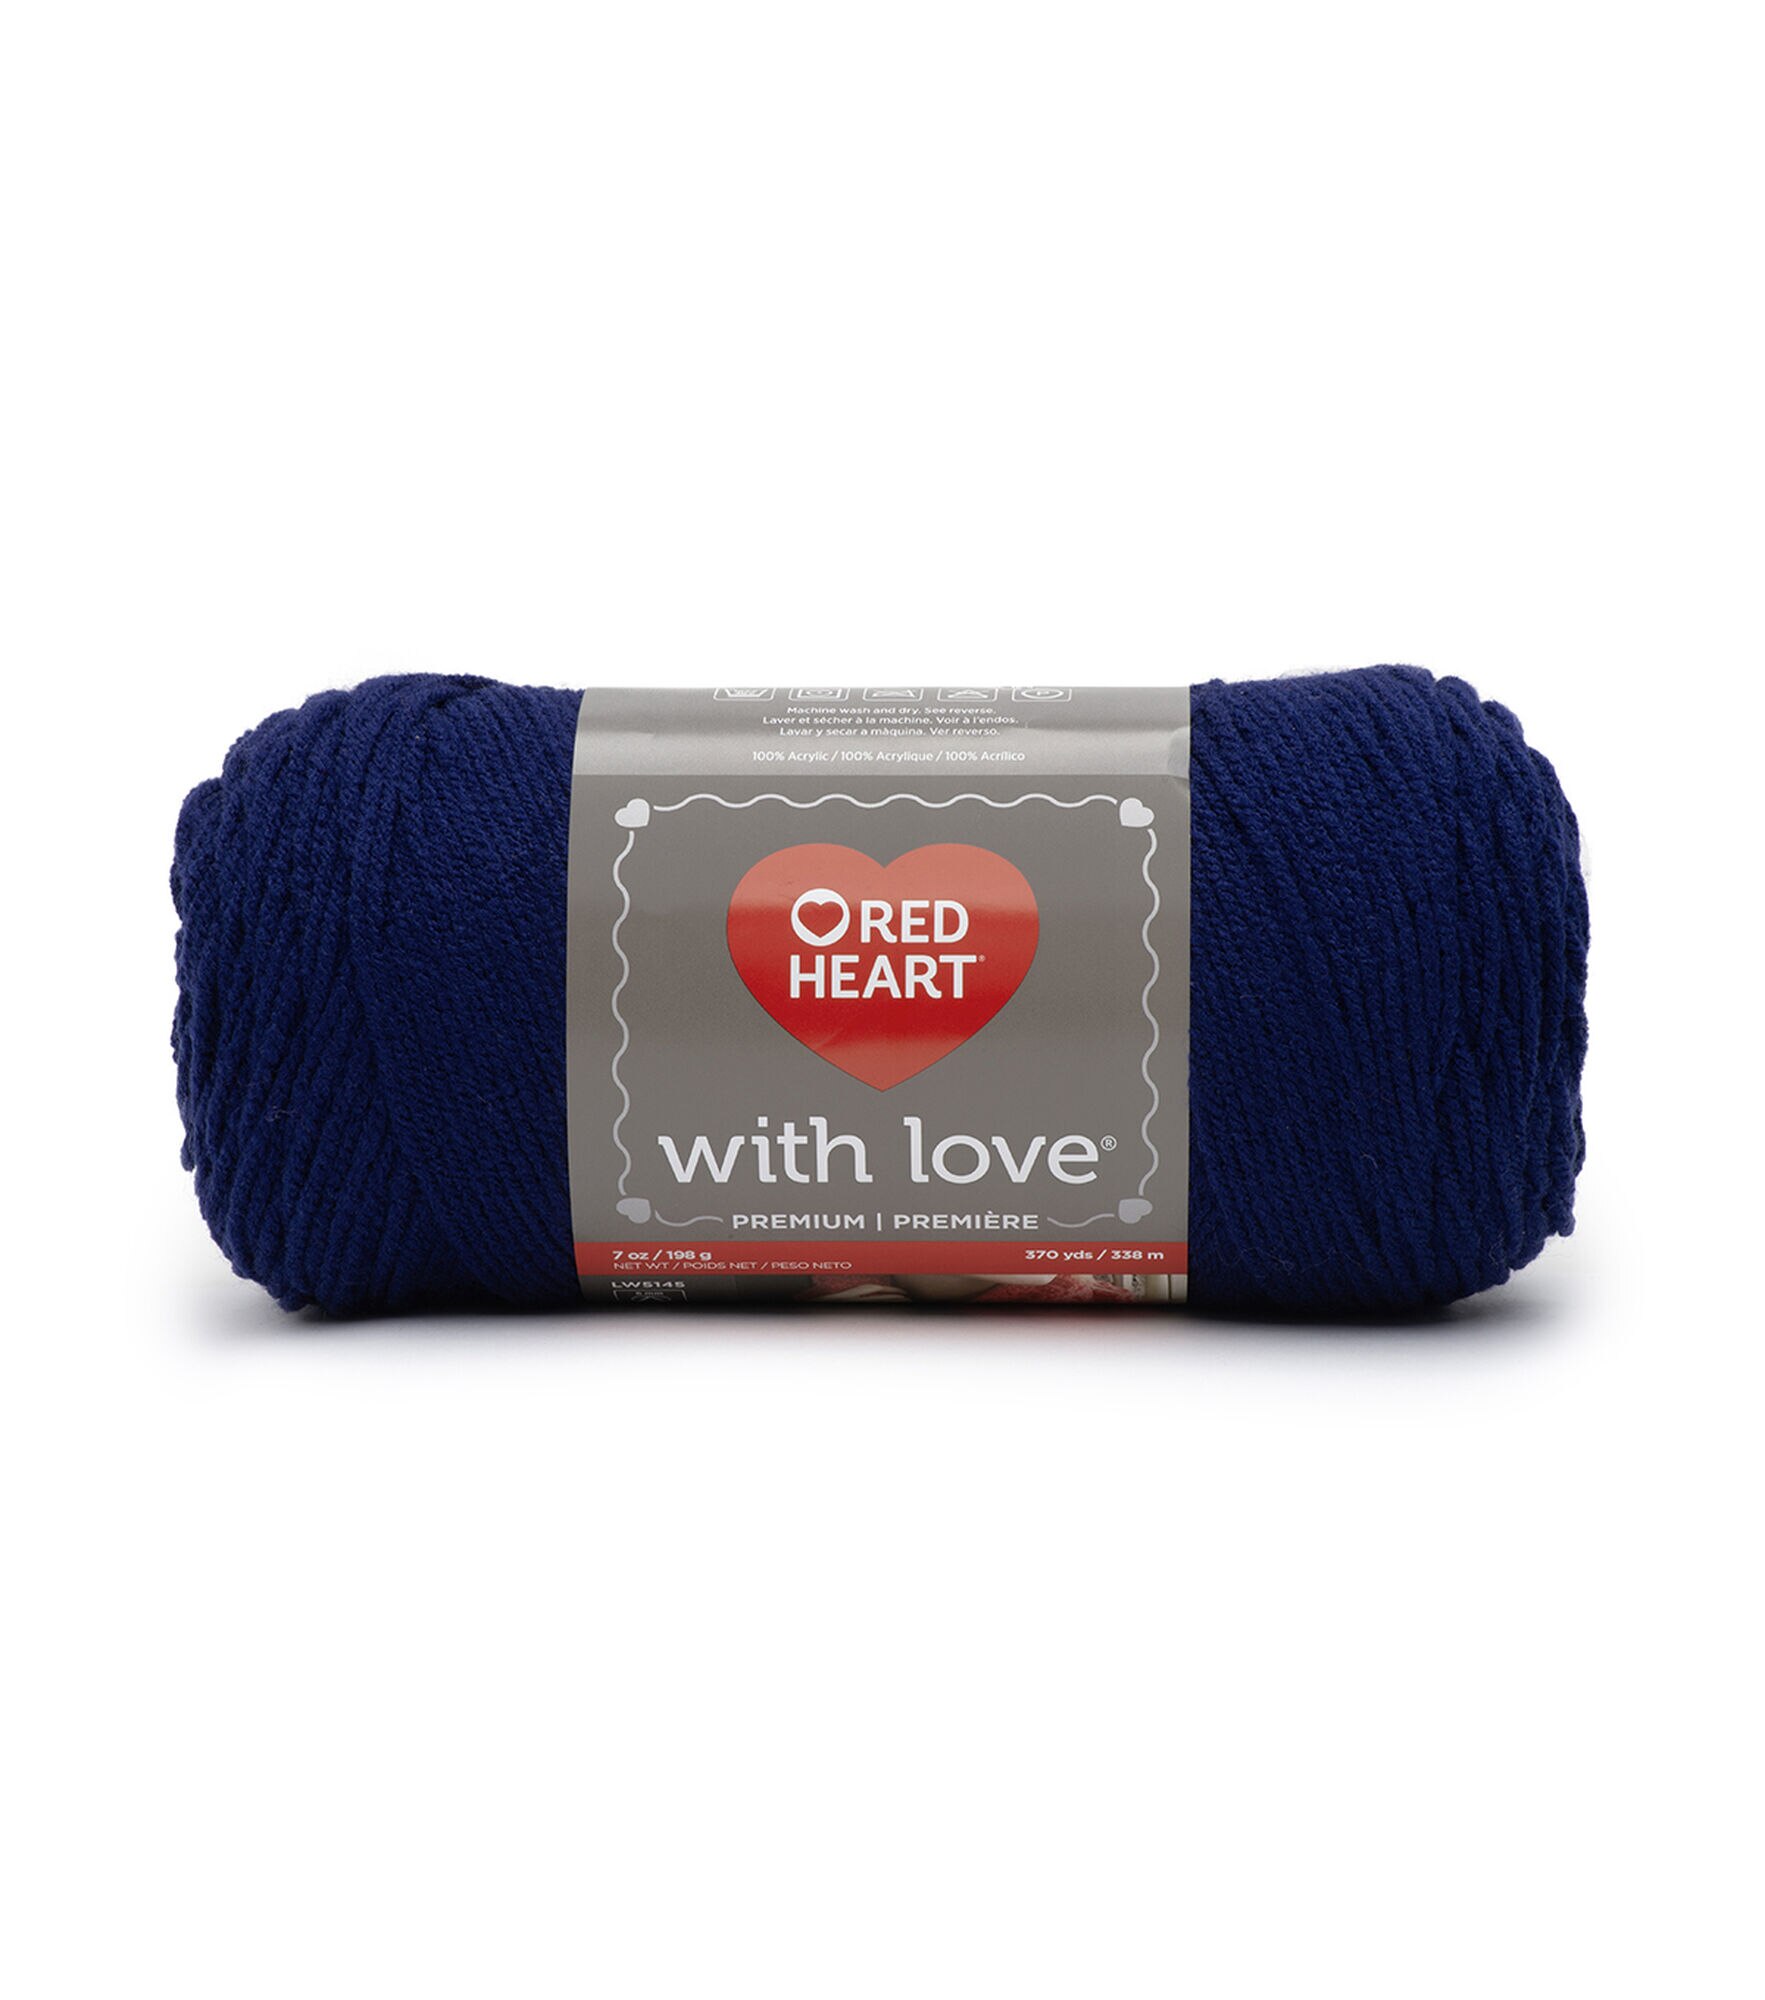 Red Heart Yarn Red Heart with Love Yarn - Black - 6 oz - Medium 4 Gauge - 3 Pack Bundle with Bella Crafts Stitch Markers